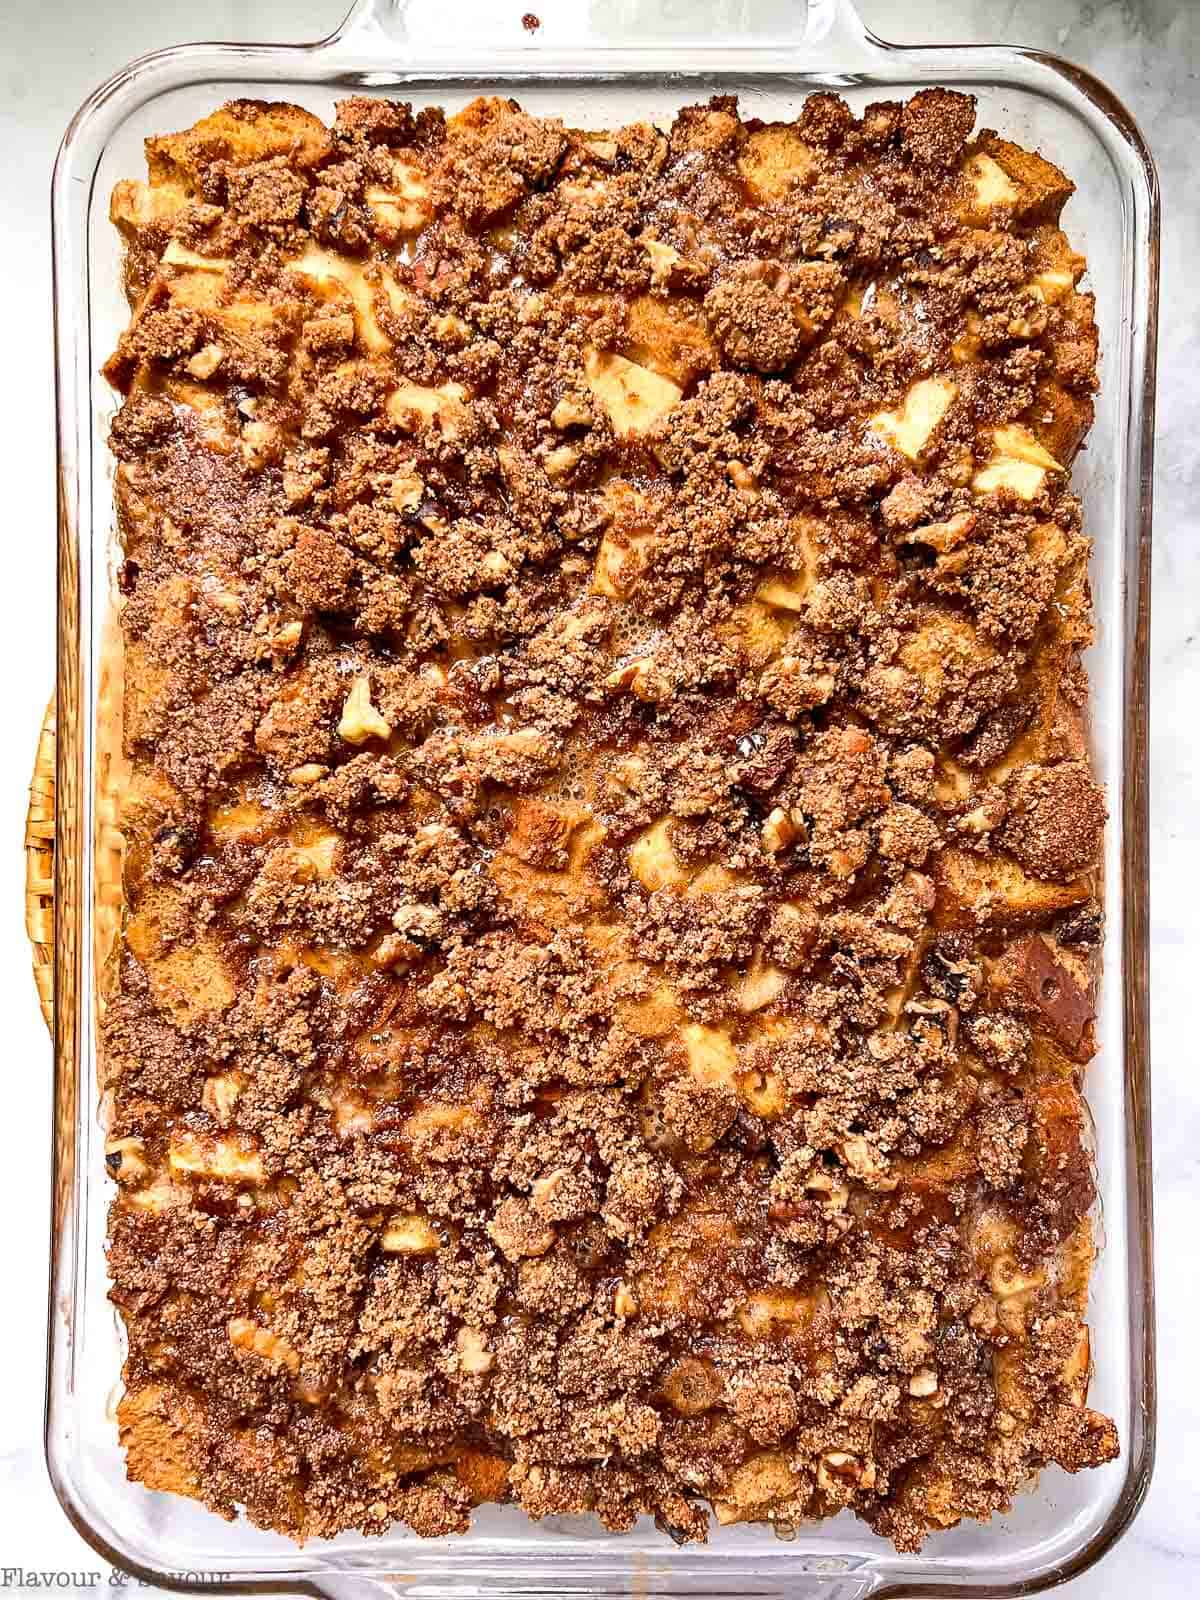 Gluten-free Apple Cinnamon French Toast casserole with streusel topping in a baking pan.